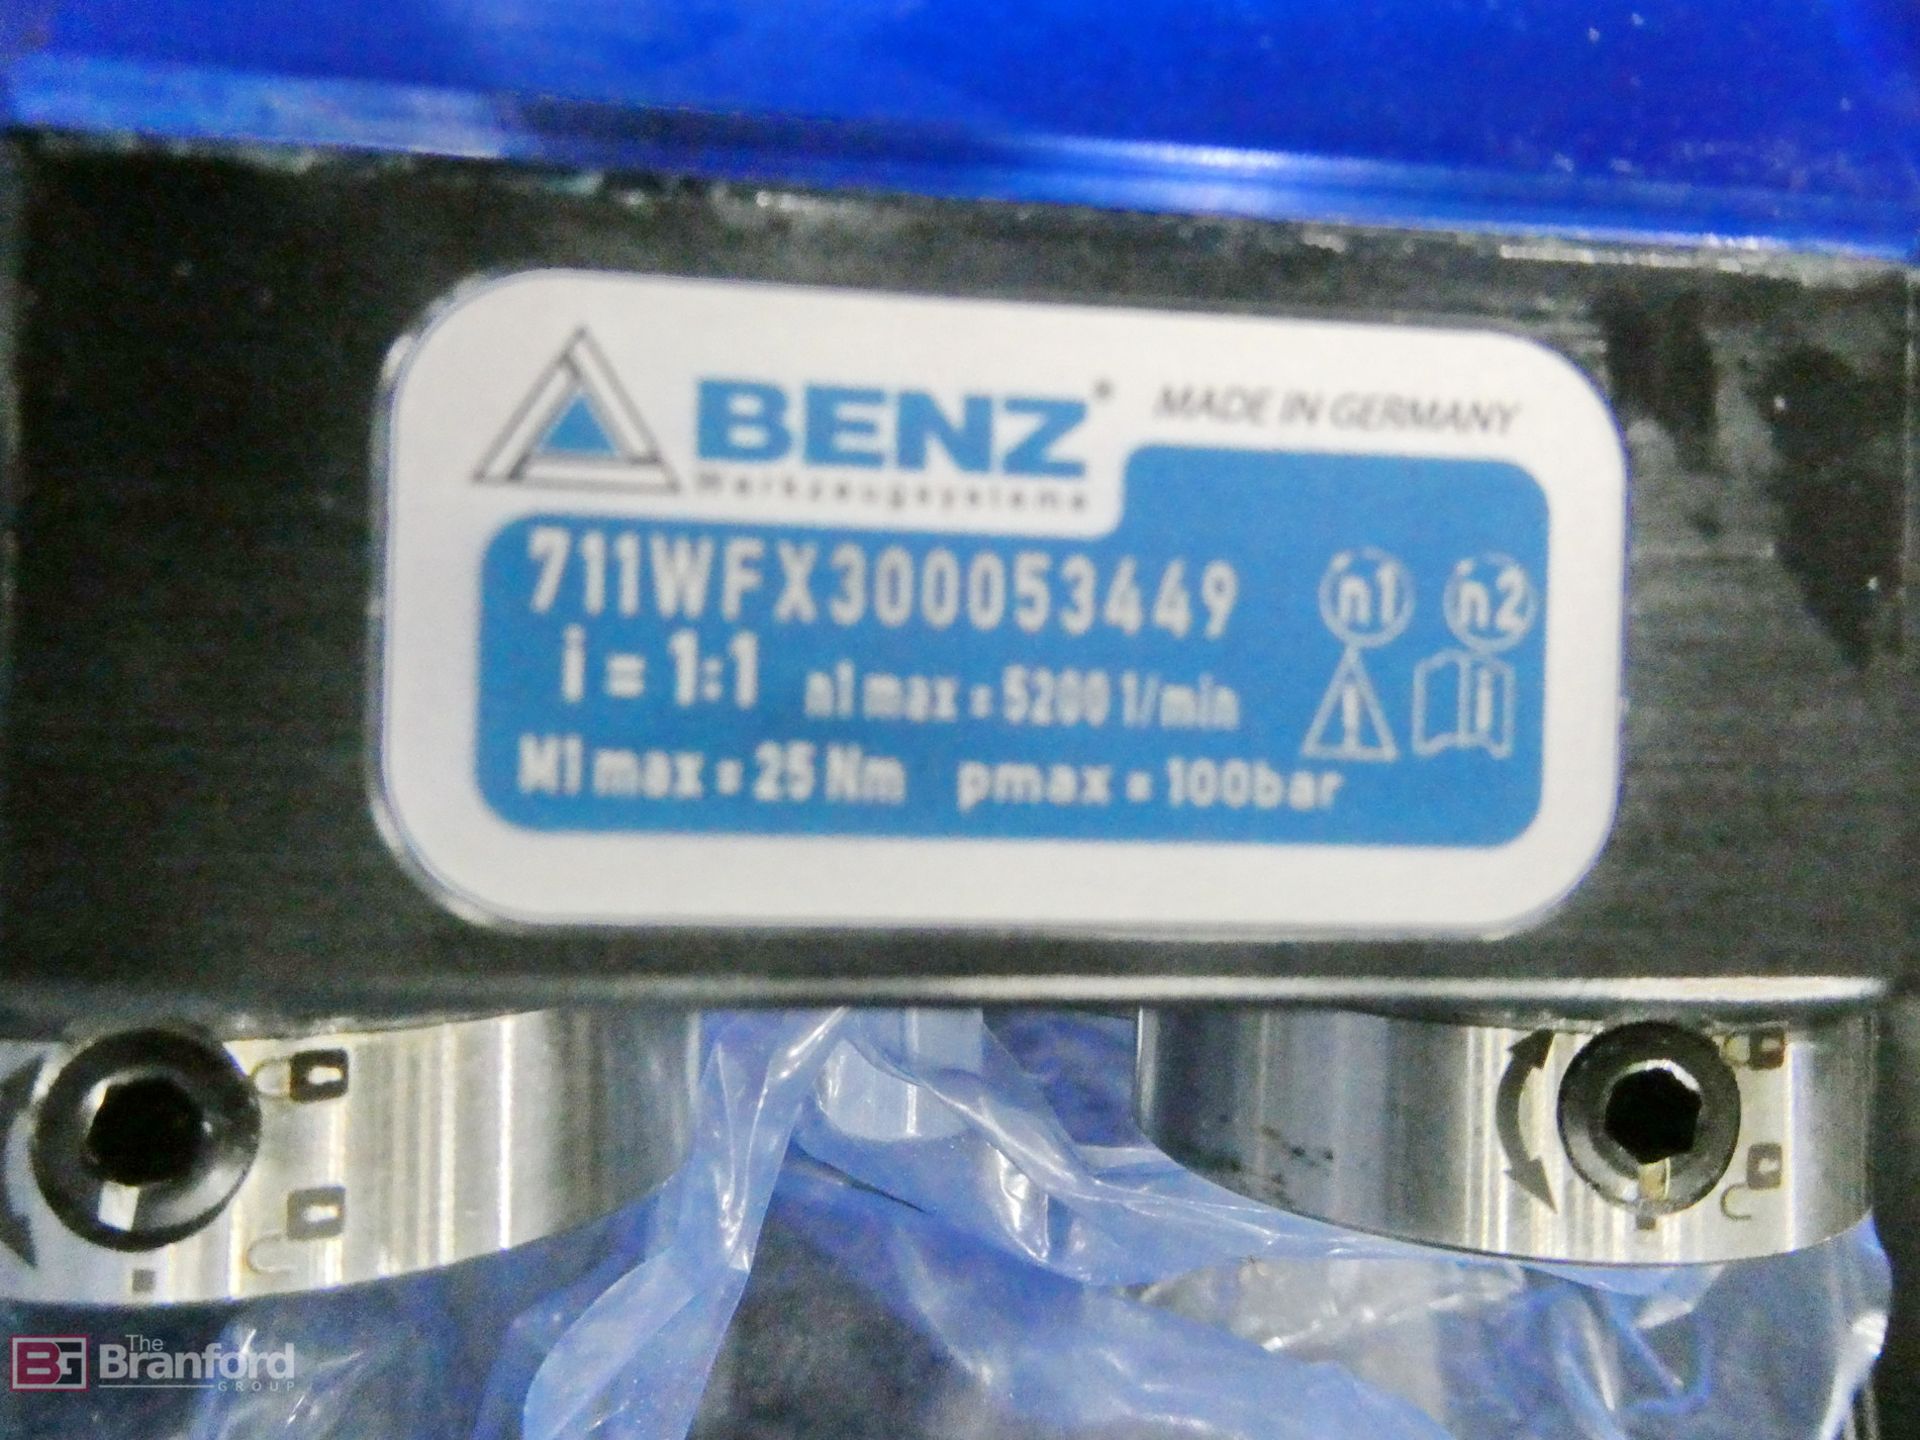 Benz Model 711WFX300053449, Multi Spindle Head - Image 5 of 7